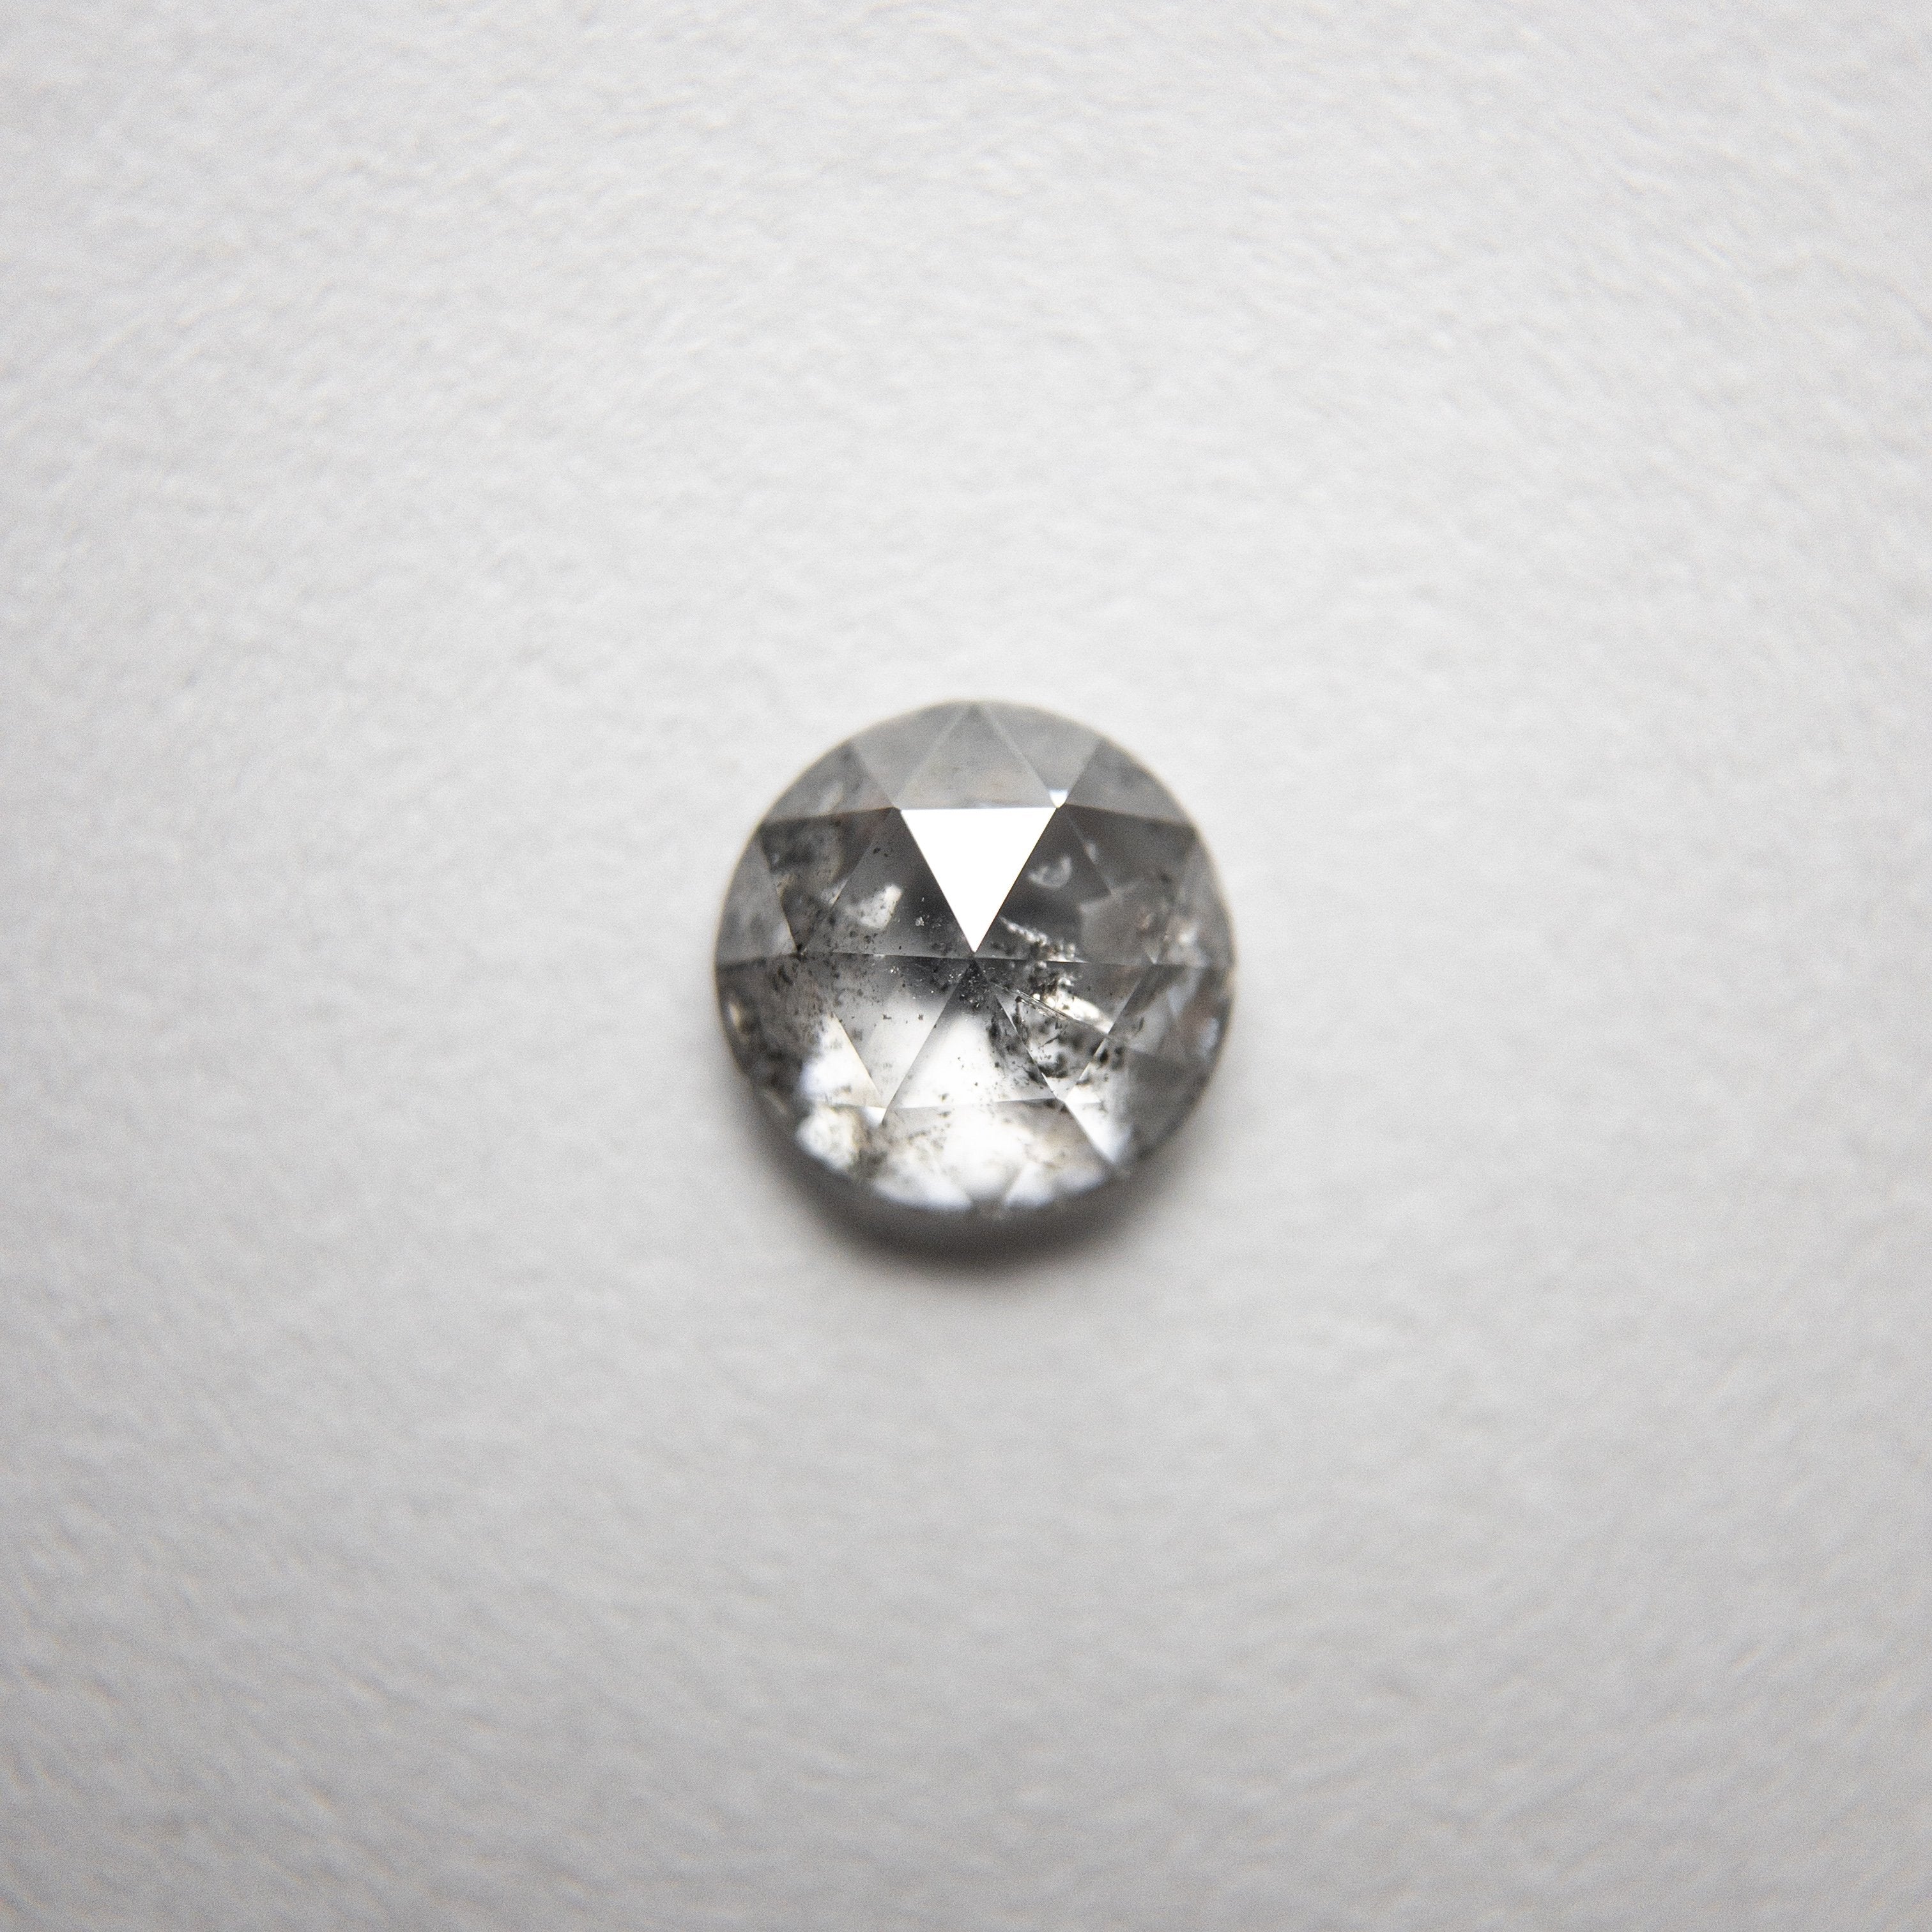 0.42ct 5.12x5.10x1.97mm Round Rosecut 18227-15 HOLD D916 7/28/20